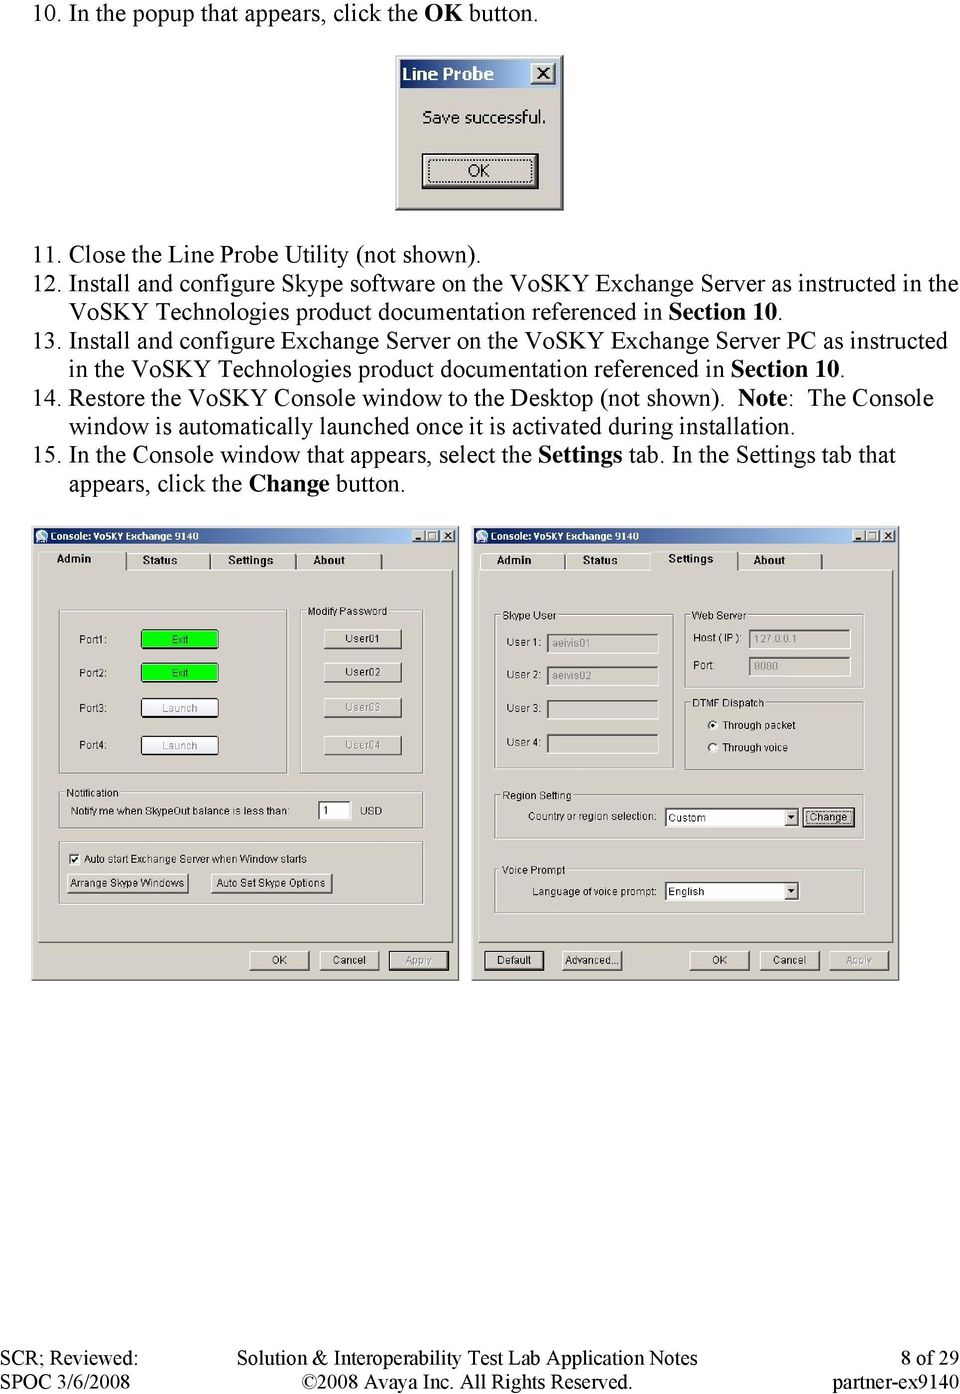 Install and configure Exchange Server on the VoSKY Exchange Server PC as instructed in the VoSKY Technologies product documentation referenced in Section 10. 14.